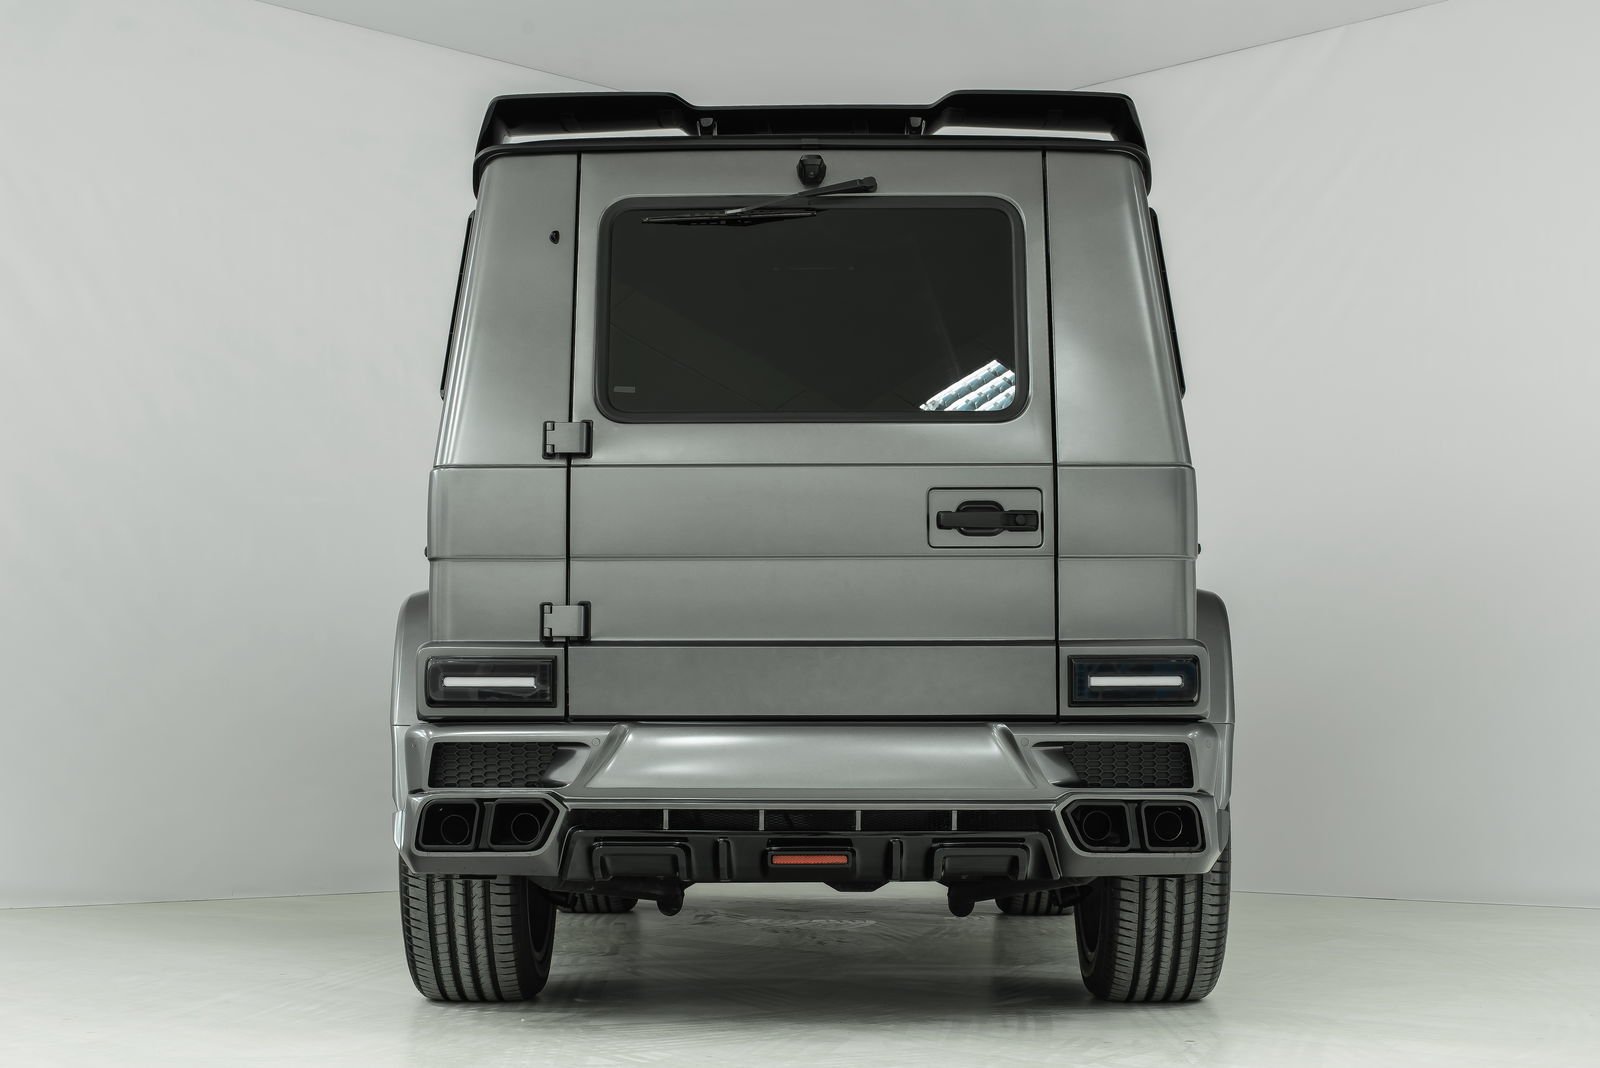 SCL PERFORMANCE DIAMANT body kit for MERCEDES G-CLASS New model